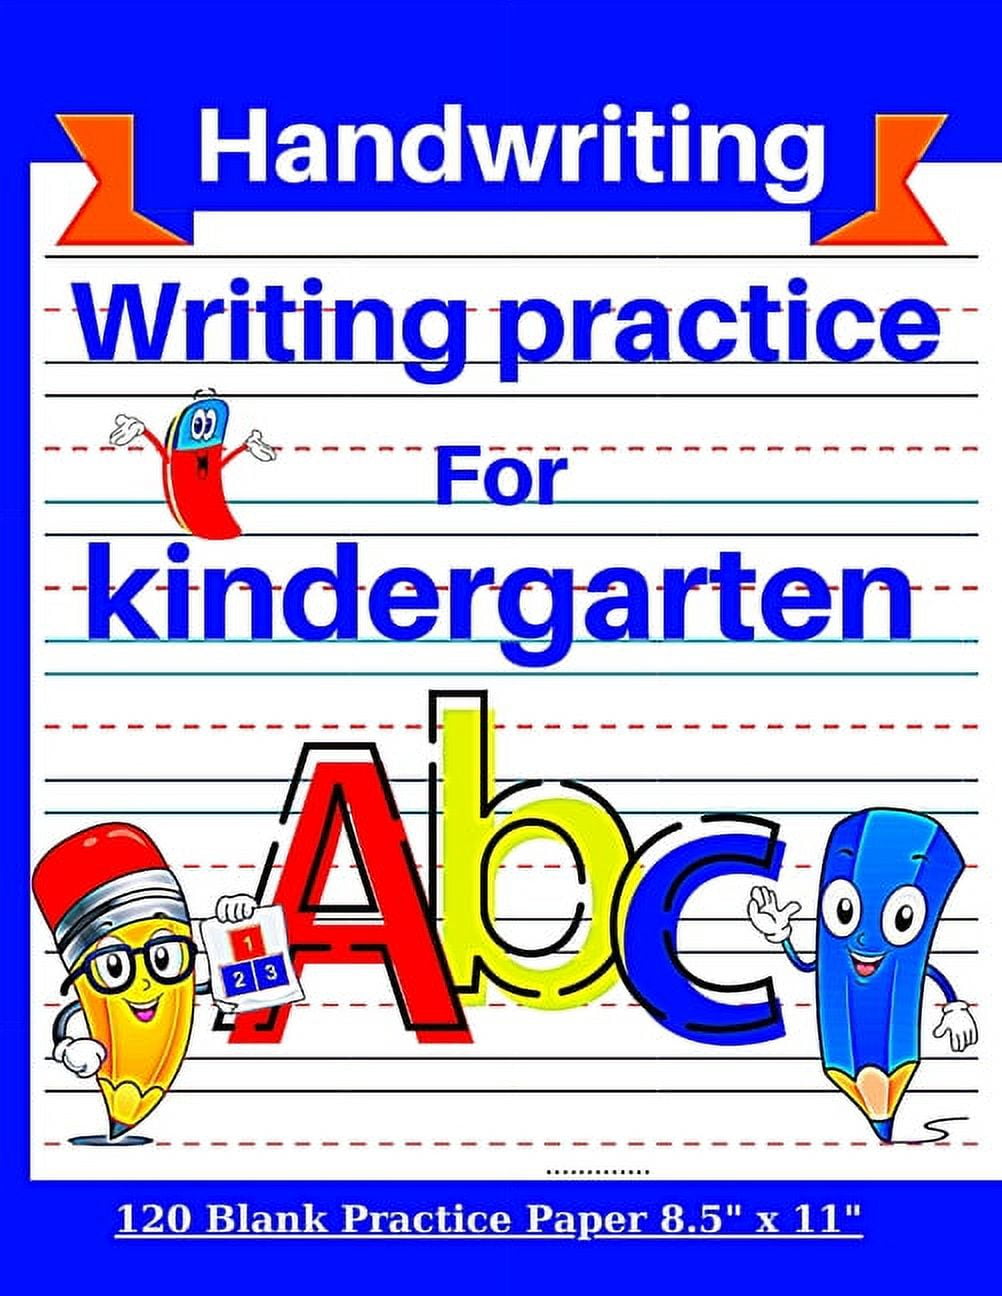 Kindergarten Writing Paper With Lines For ABC Kids: For Students